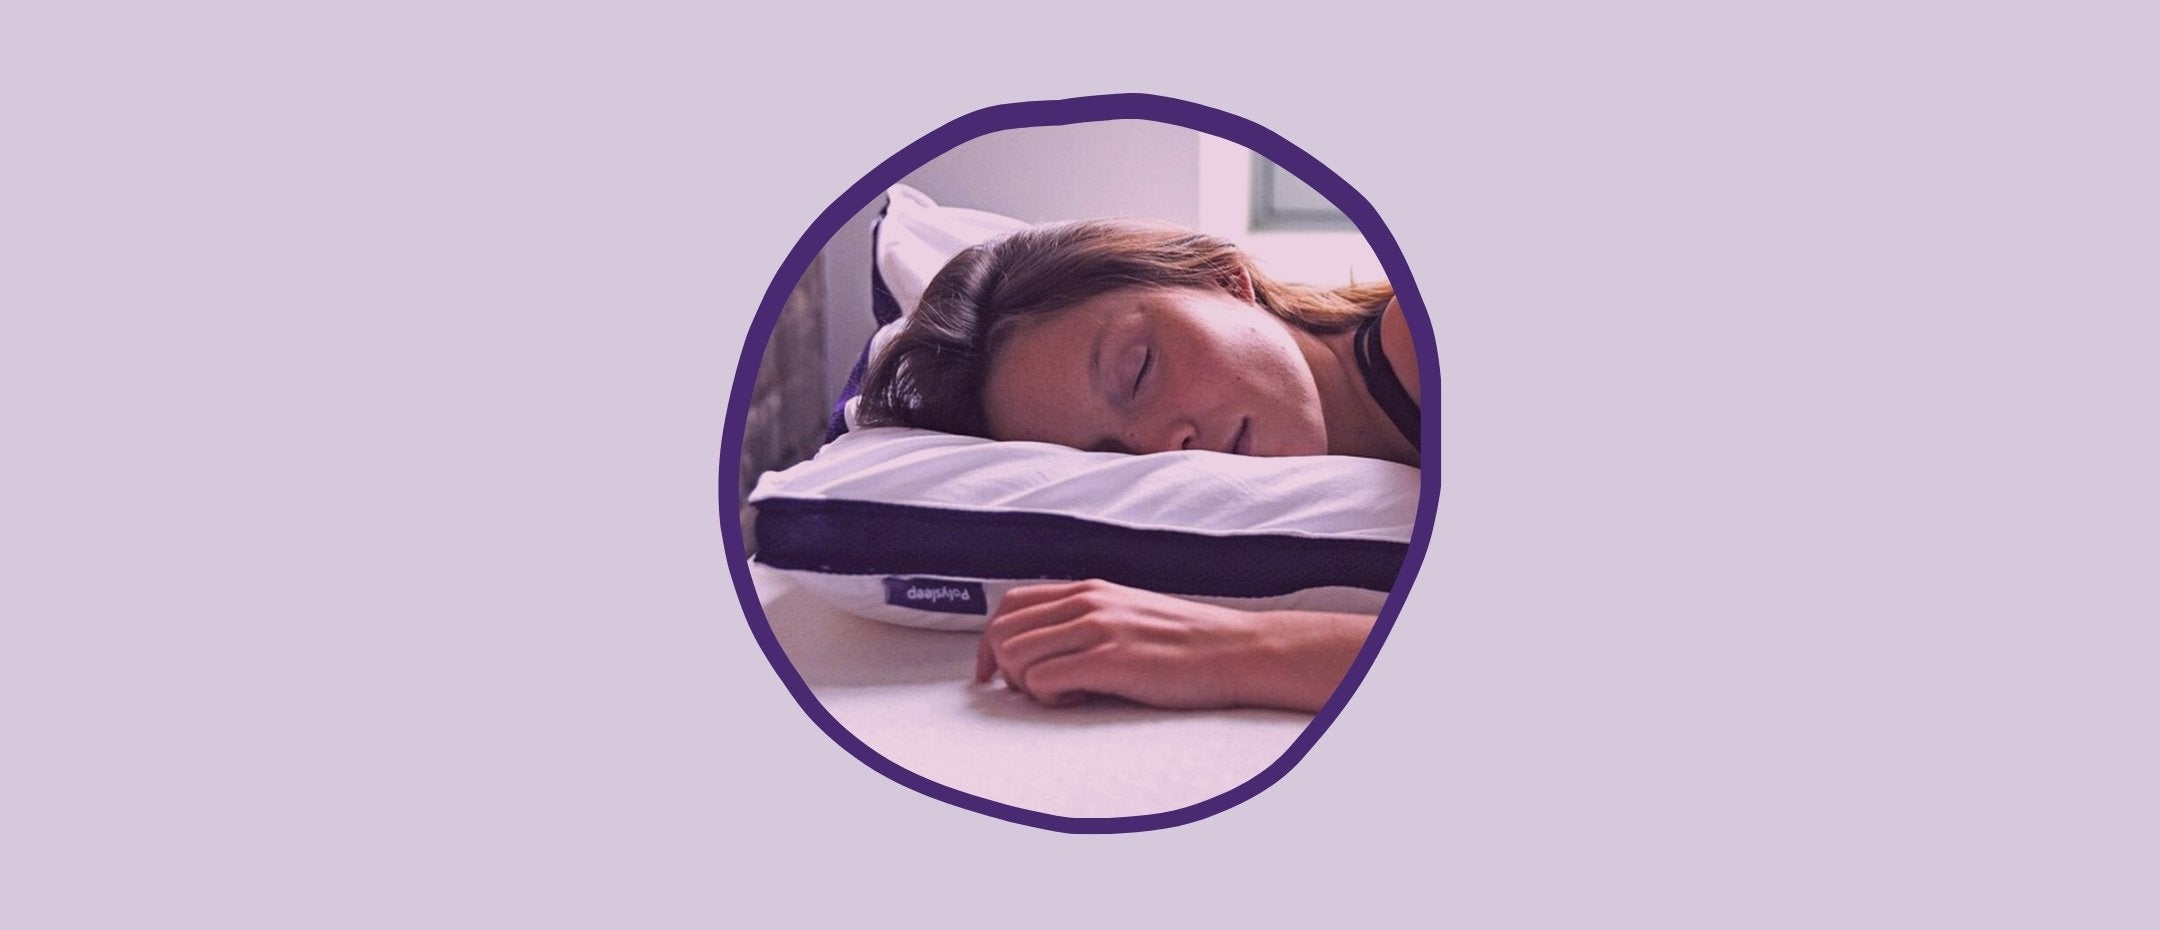 A woman with her head lying on the Polysleep pillow